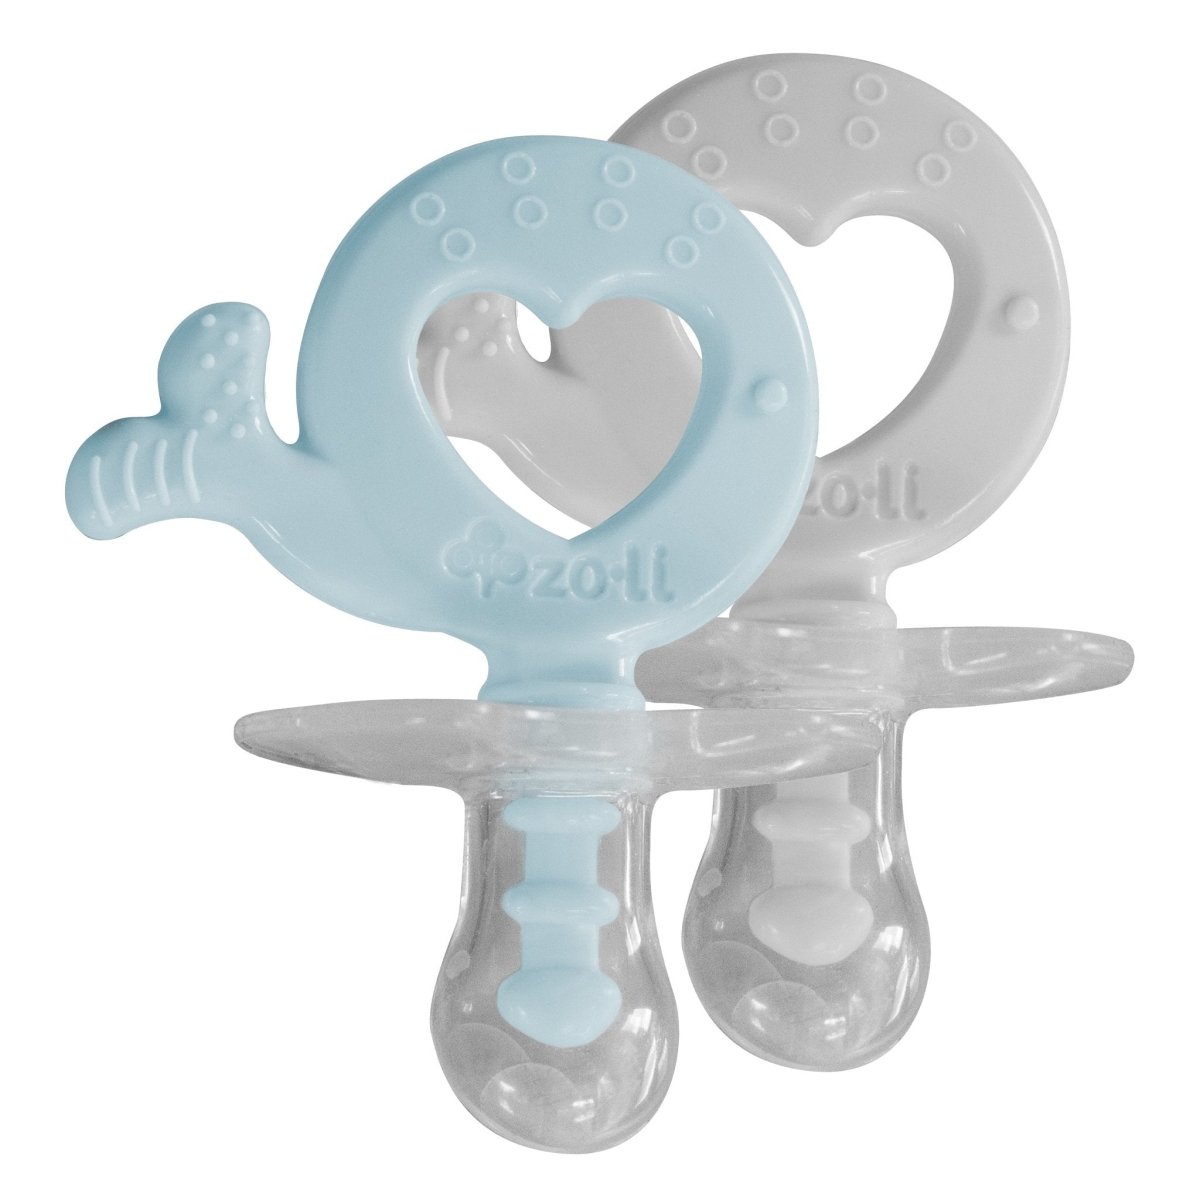 ZoLi BINKI.T Pacifier + Teether Combination Whale(Pack of 2) - Mist Blue/Ash - BF19PTMW01